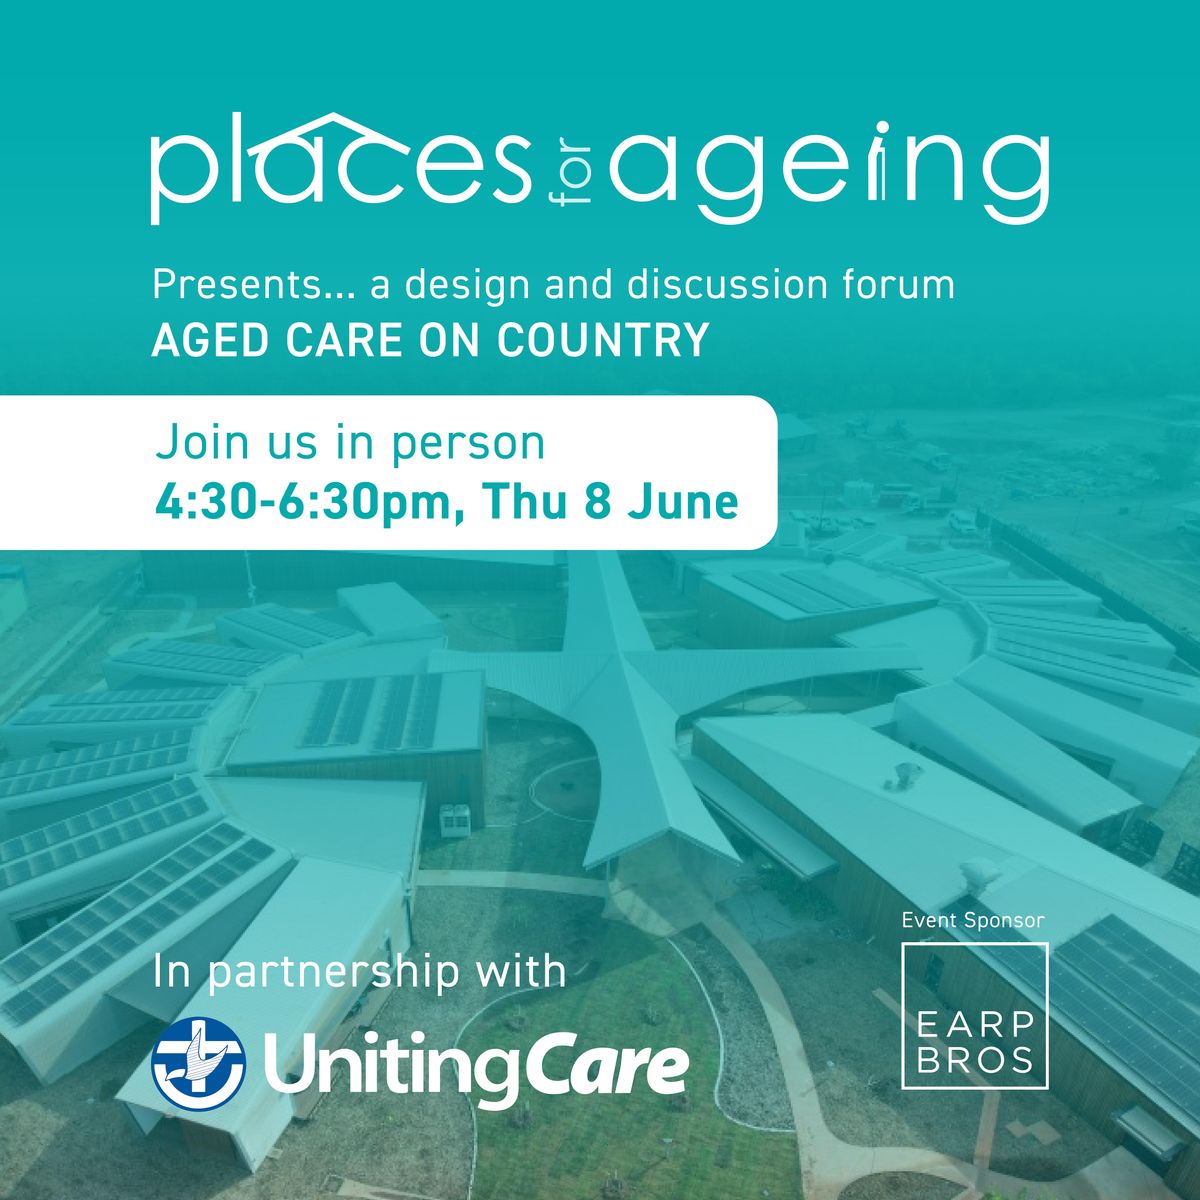 Places for Ageing presents...a design forum: AGED CARE ON COUNTRY